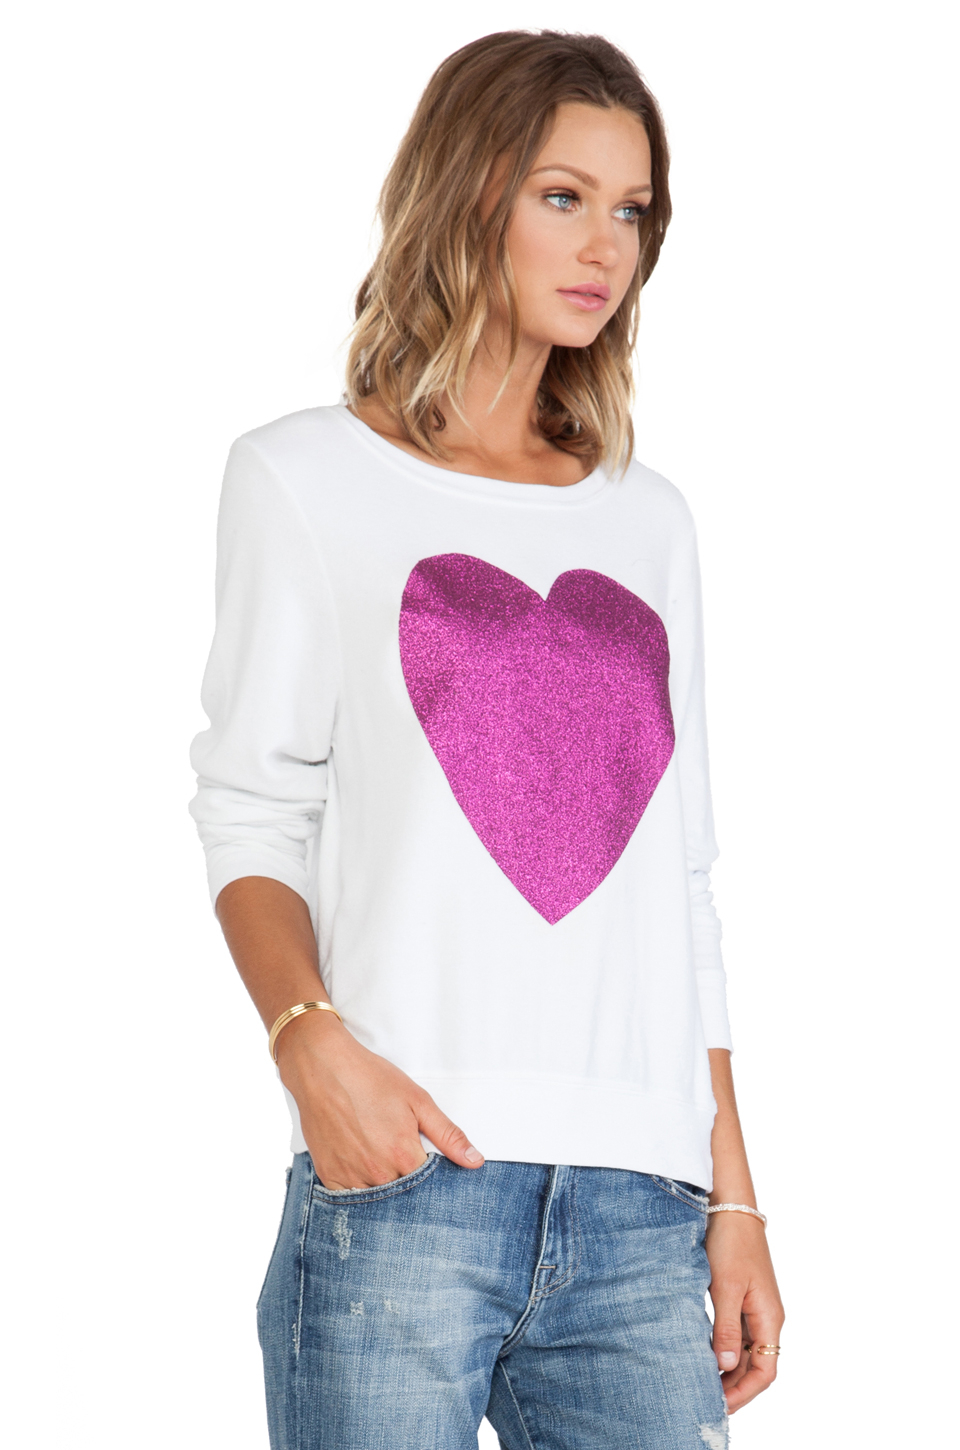 Lyst - Wildfox X Revolve Sparkle Heart Sweater in White